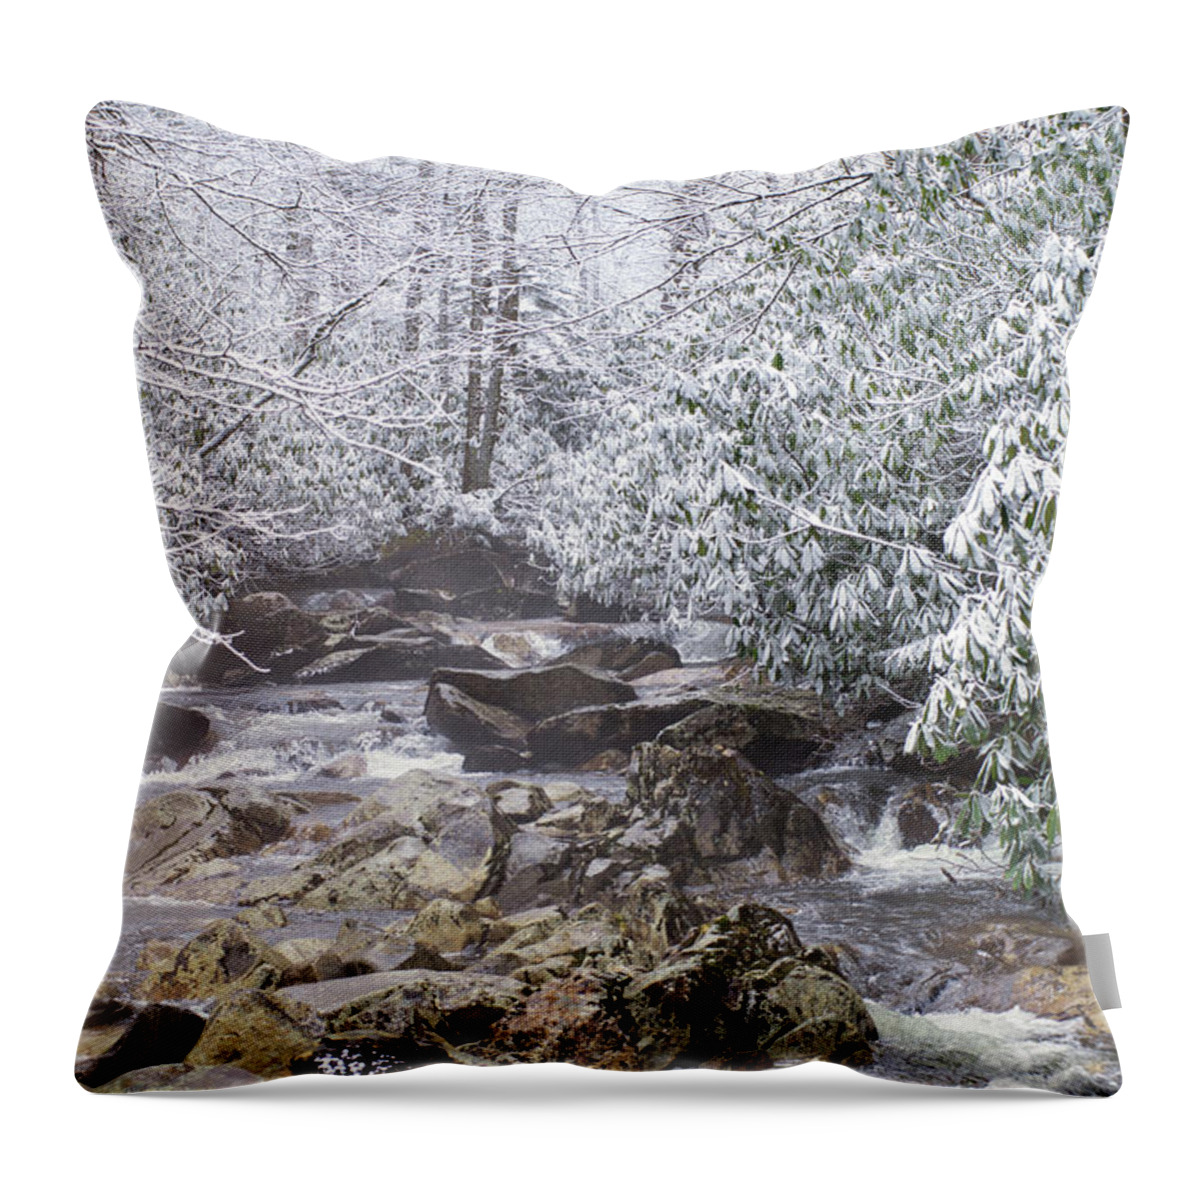 Great Smoky Mountains National Park Throw Pillow featuring the photograph Snowy Creek by Stacy Abbott